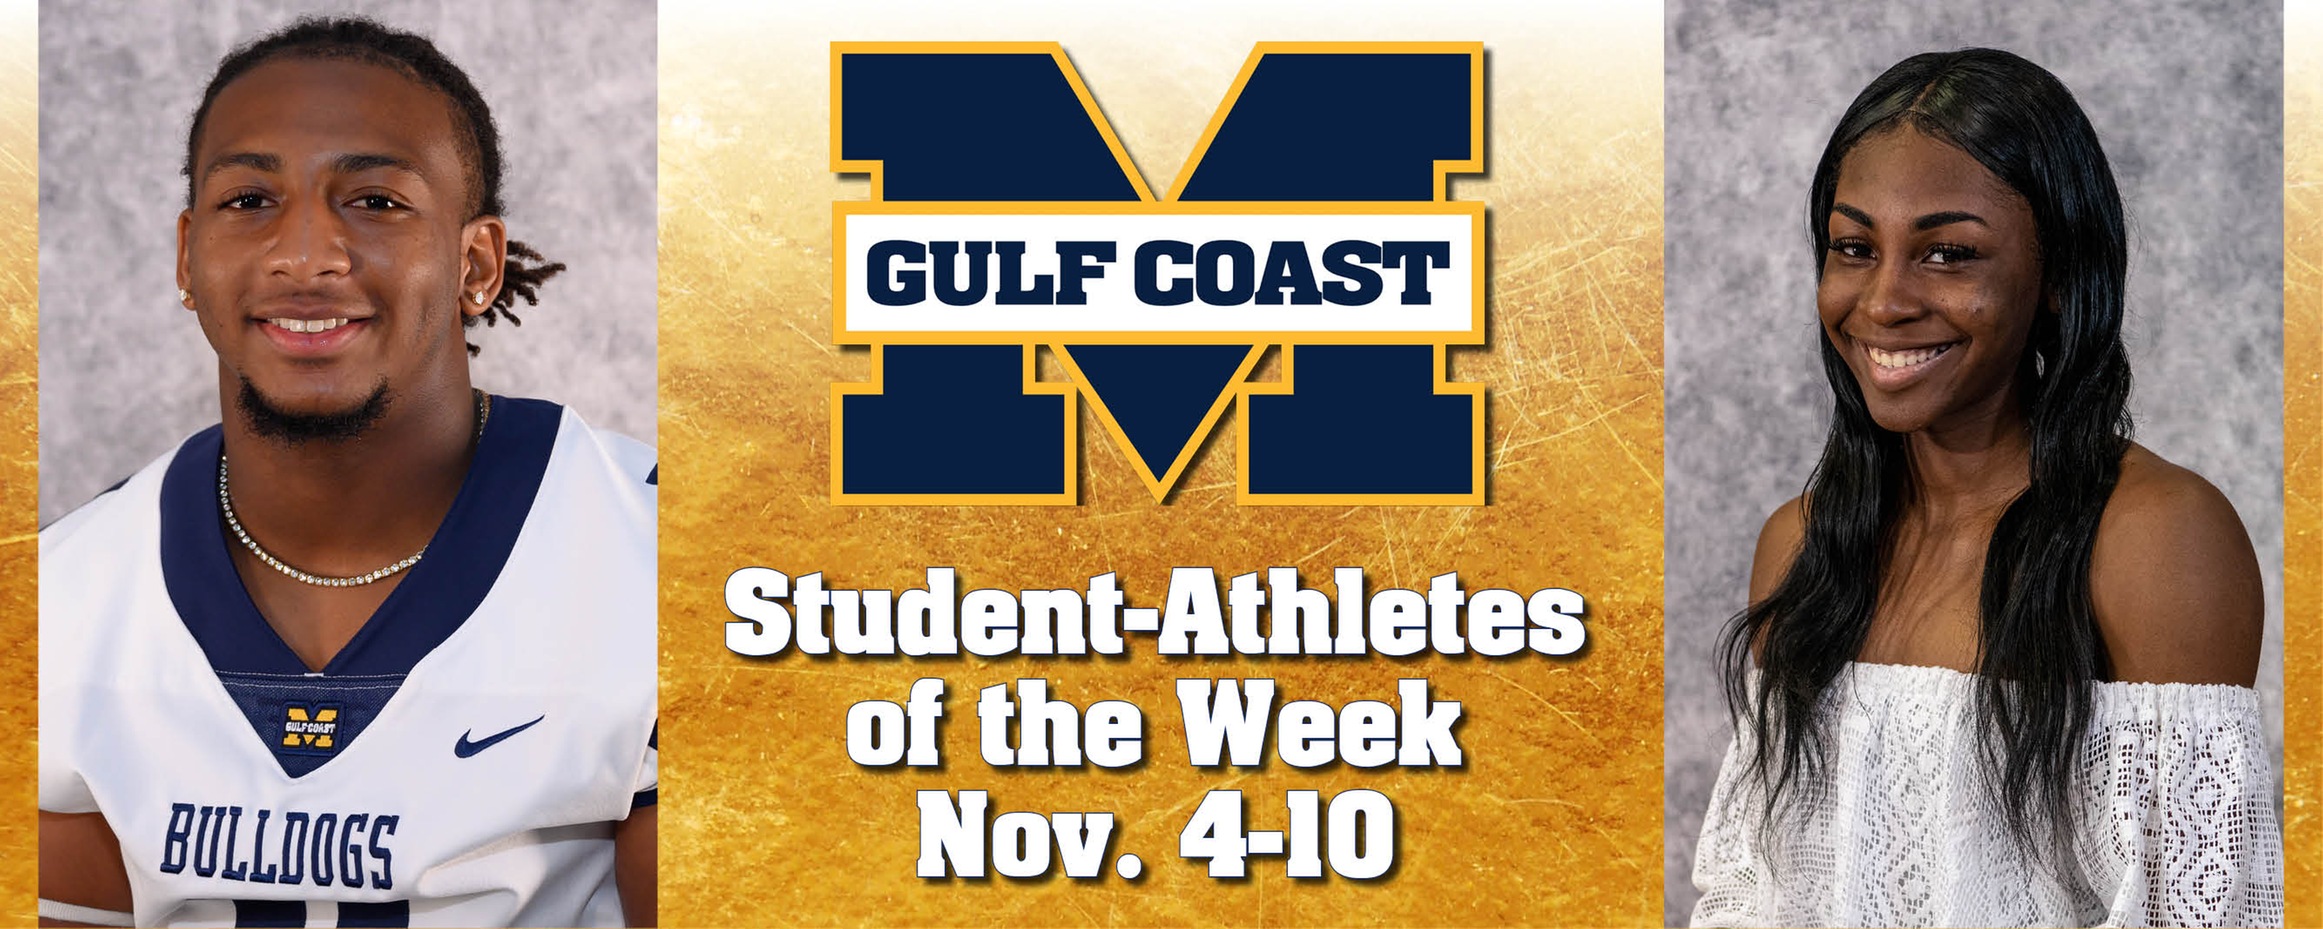 Bolton, Jackson named MGCCC Student-Athletes of the Week